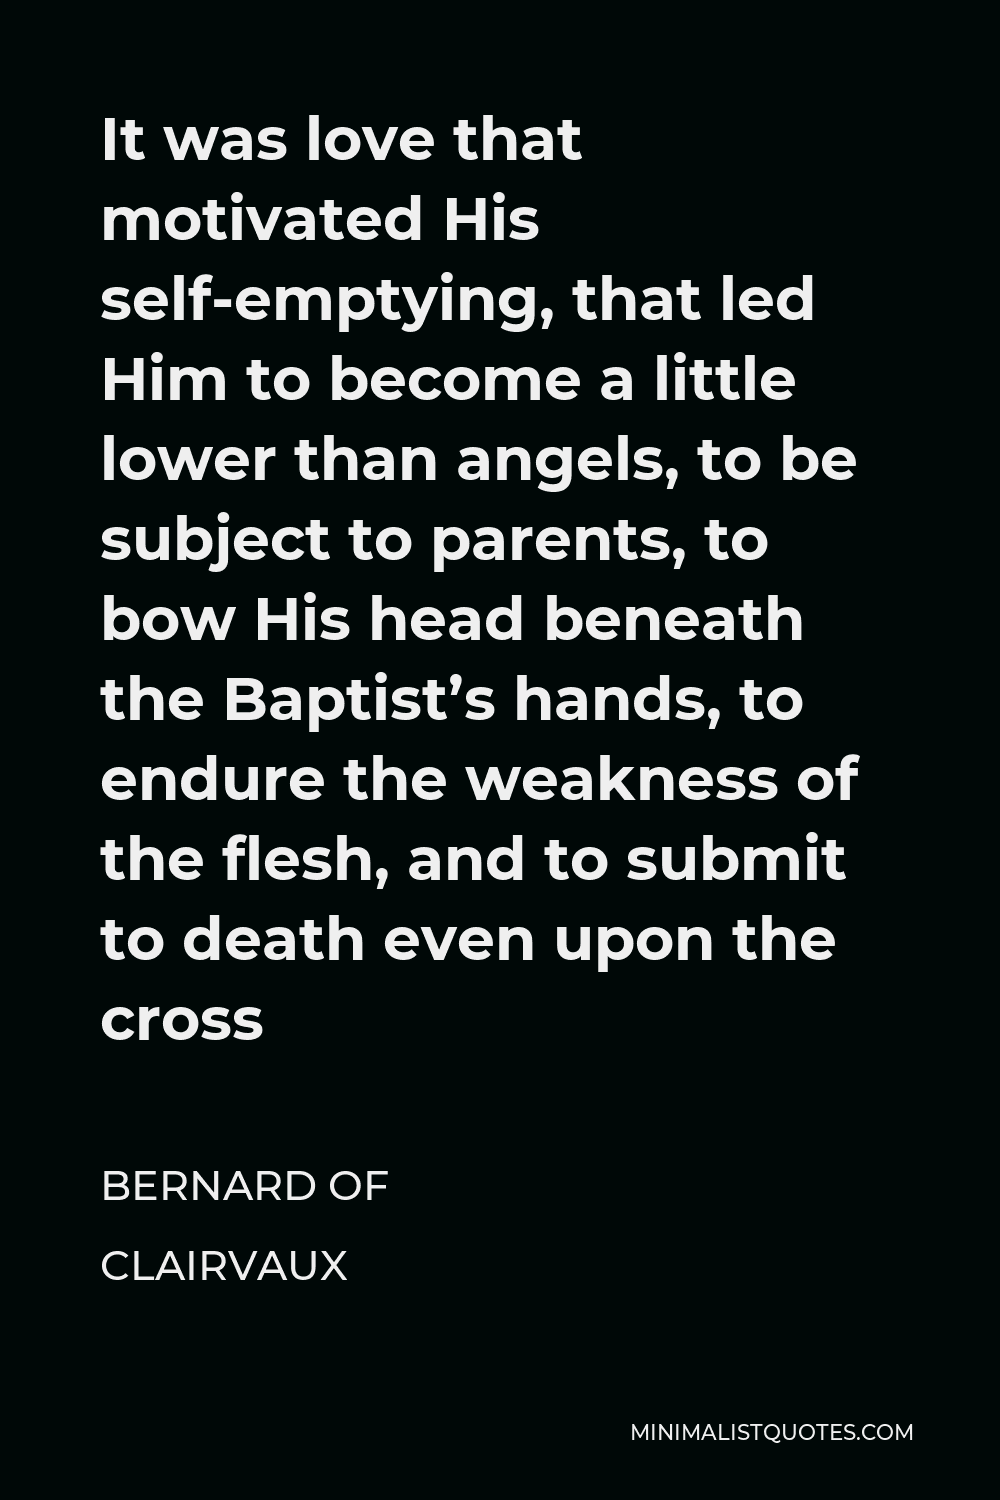 Bernard of Clairvaux Quote - It was love that motivated His self-emptying, that led Him to become a little lower than angels, to be subject to parents, to bow His head beneath the Baptist’s hands, to endure the weakness of the flesh, and to submit to death even upon the cross